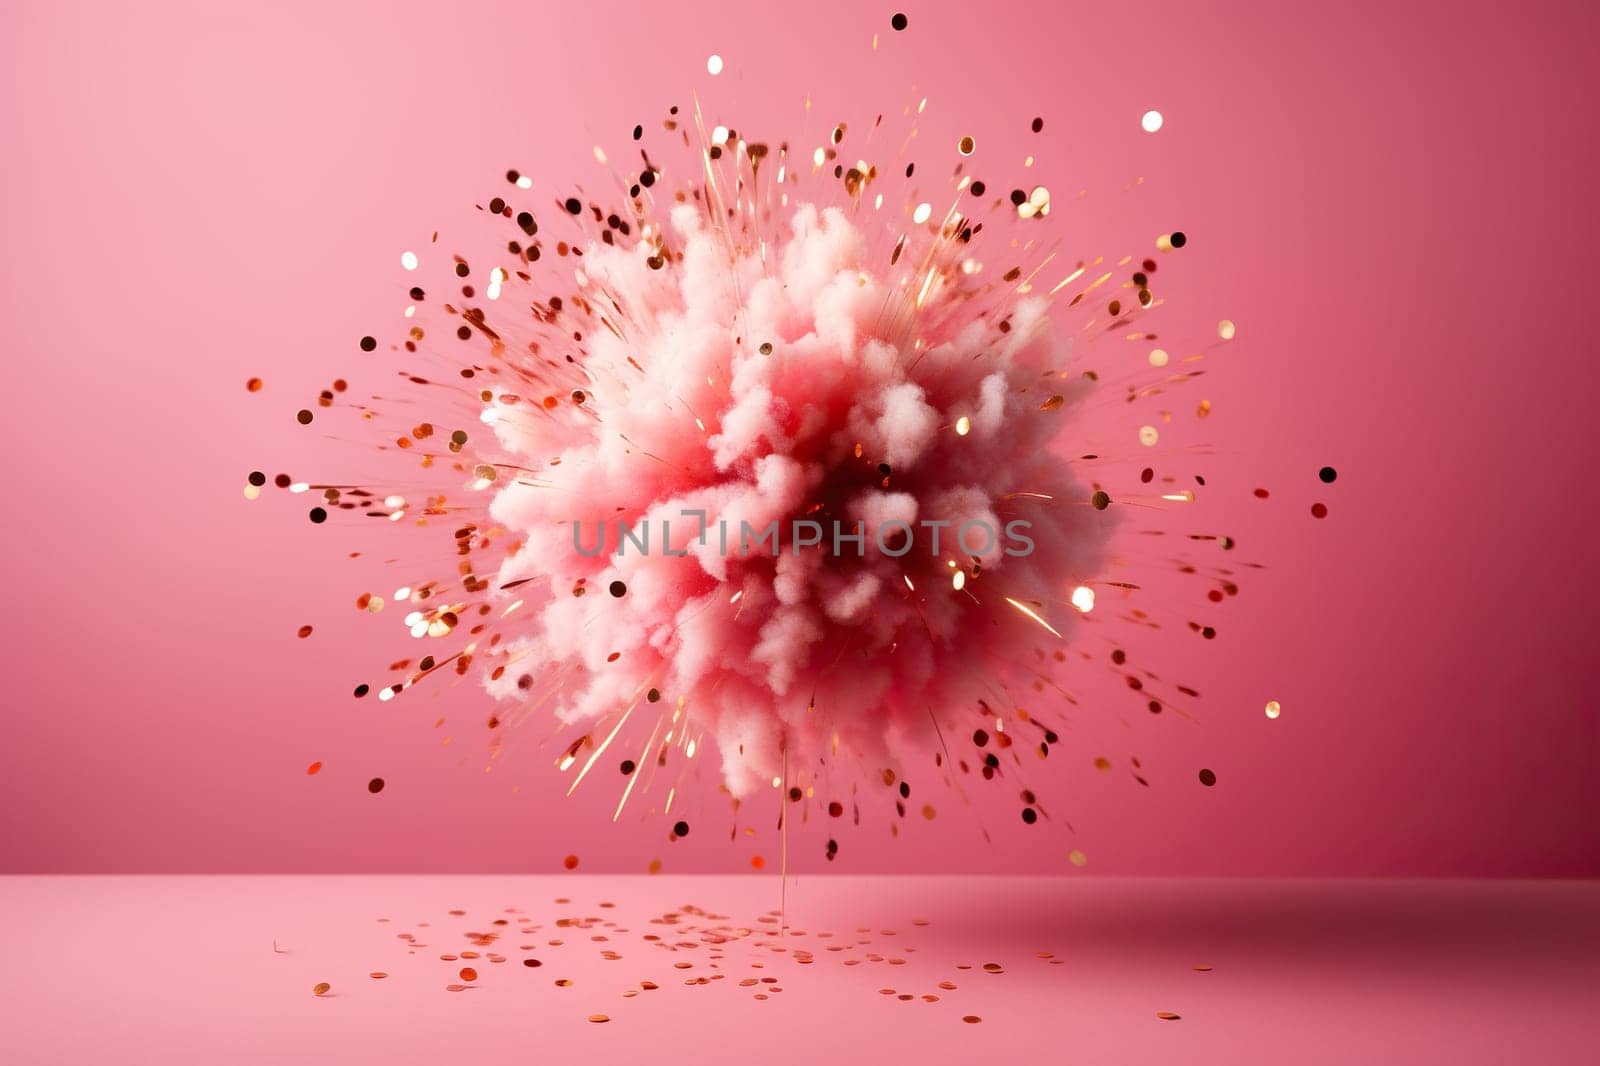 Splash of pink dust and gold color glitter for trendy background, luxury pink wallpaper.